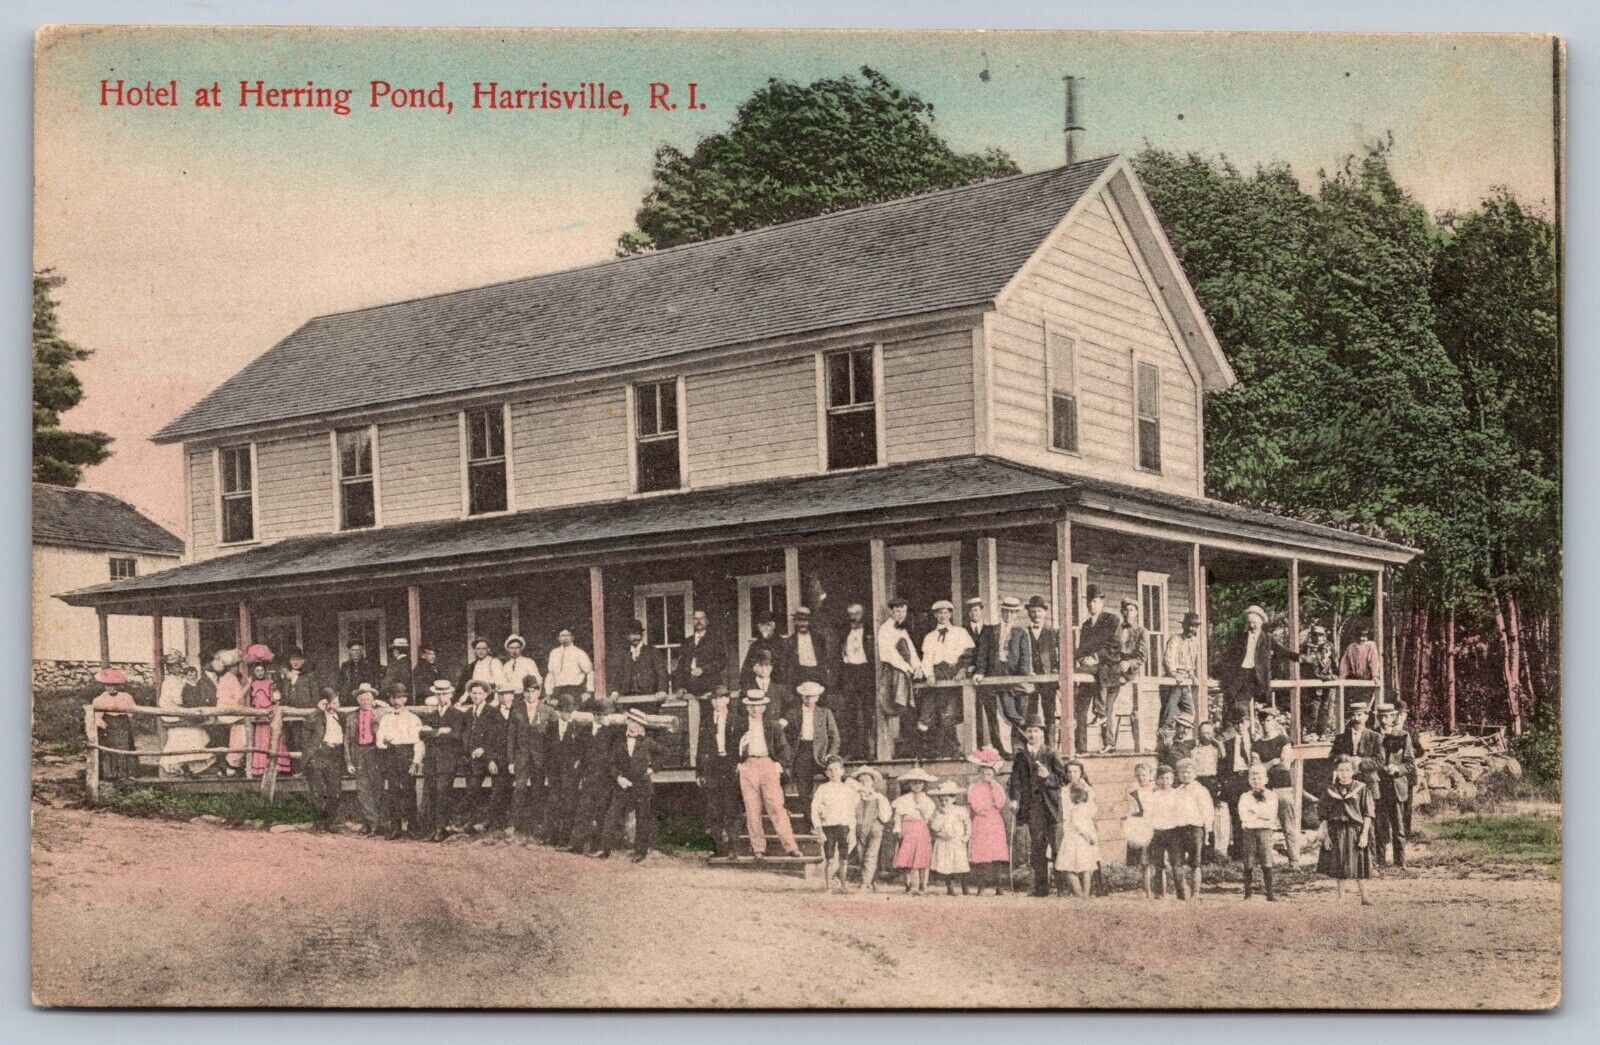 c1910 HARRISVILLE RHODE ISLAND HOTEL HERRING POND porch packed with people